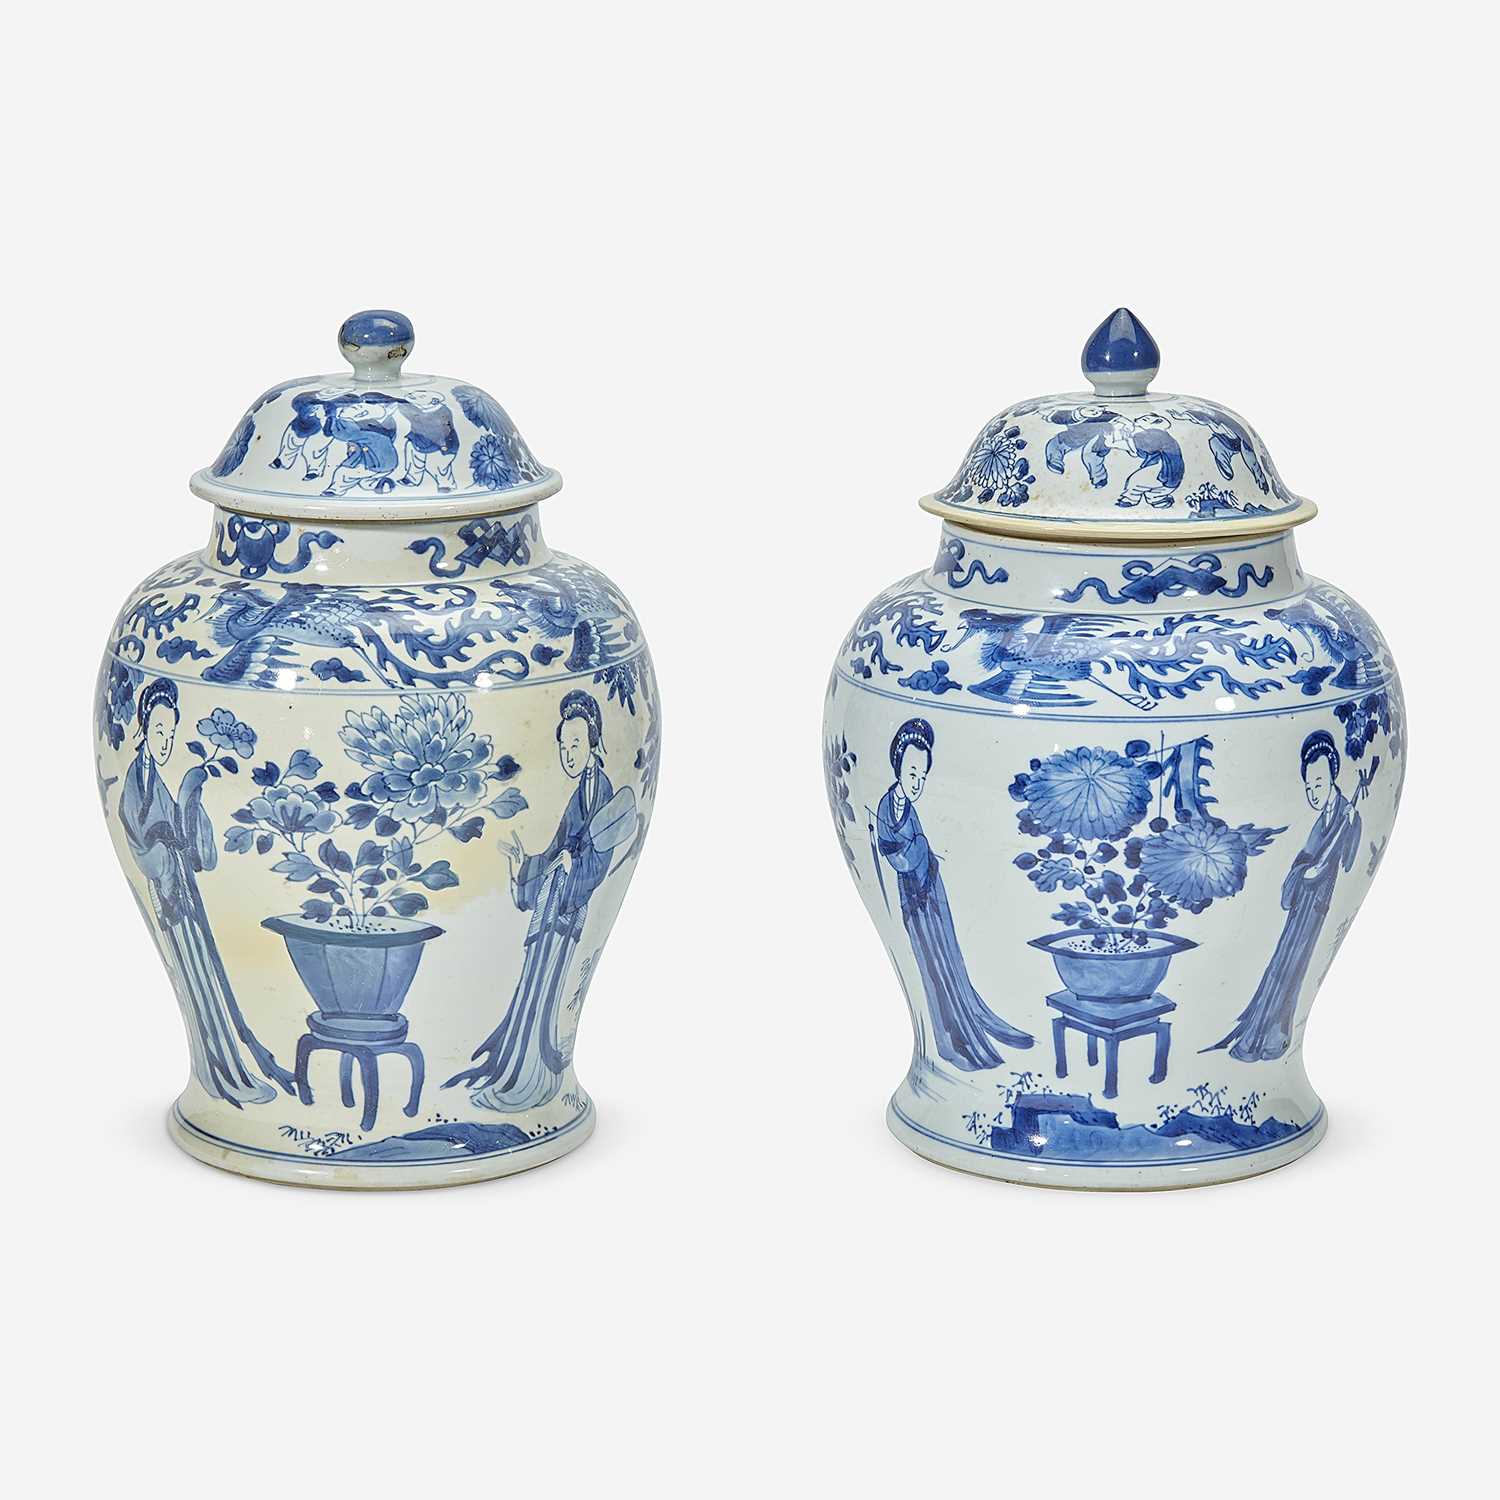 Lot 7 - Two similar Chinese blue and white porcelain baluster jars and covers